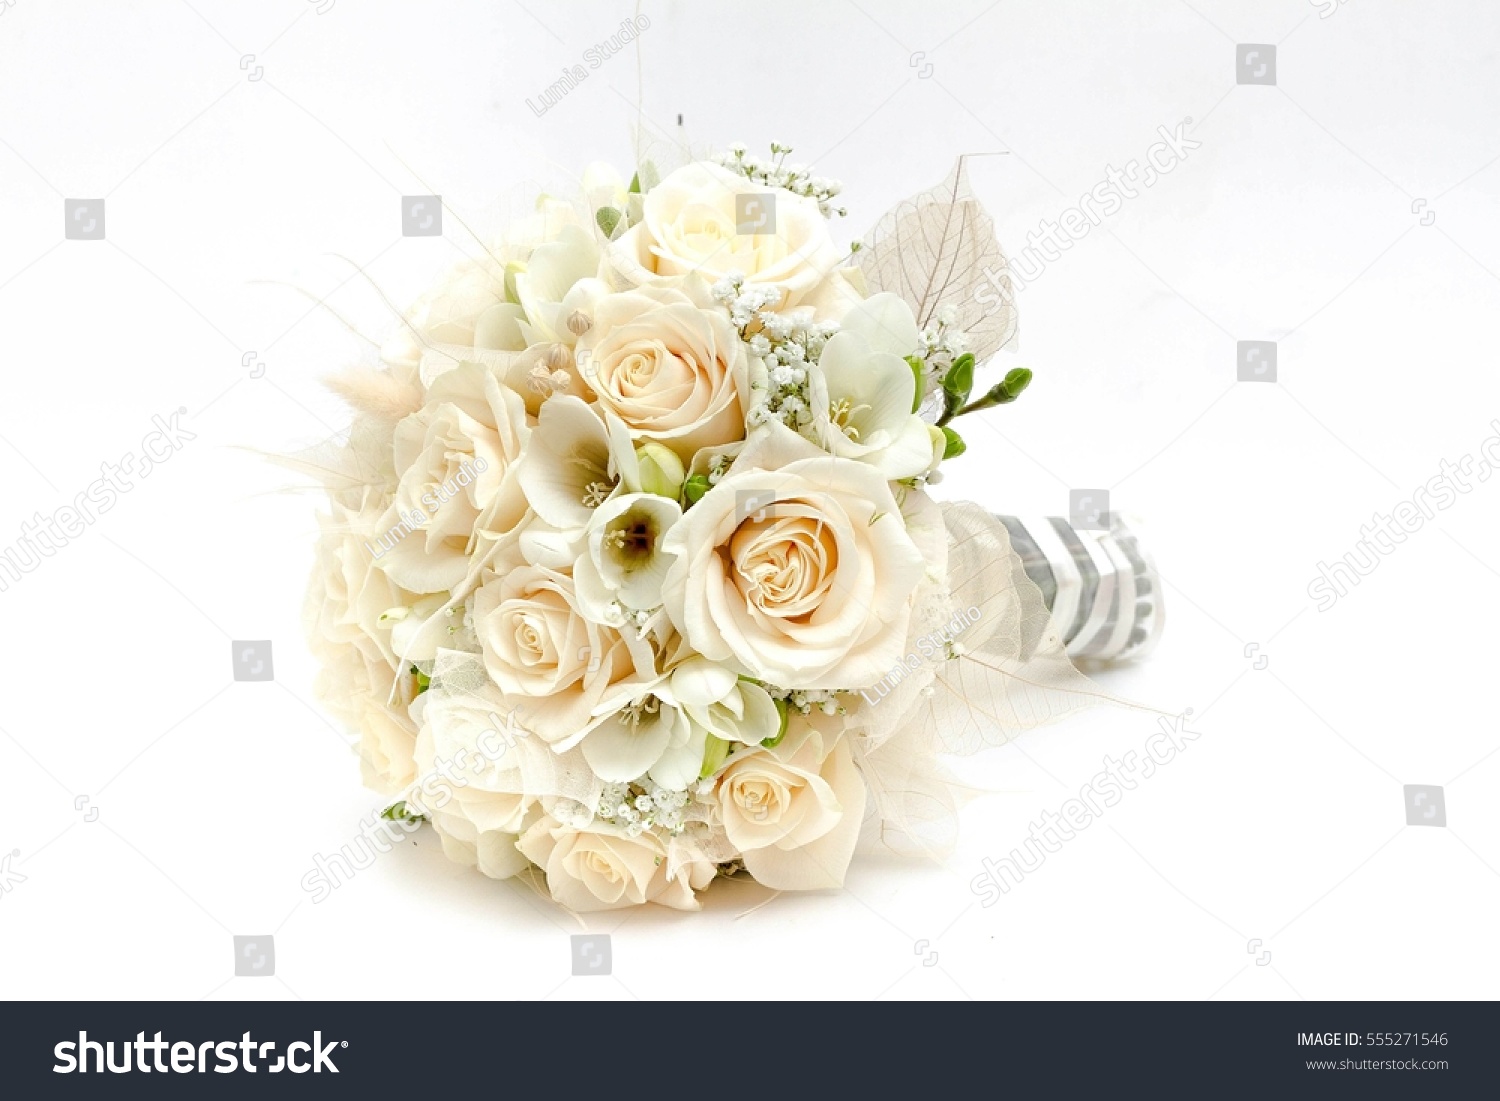 Wedding bouquet made of white roses isolated on a white background #555271546